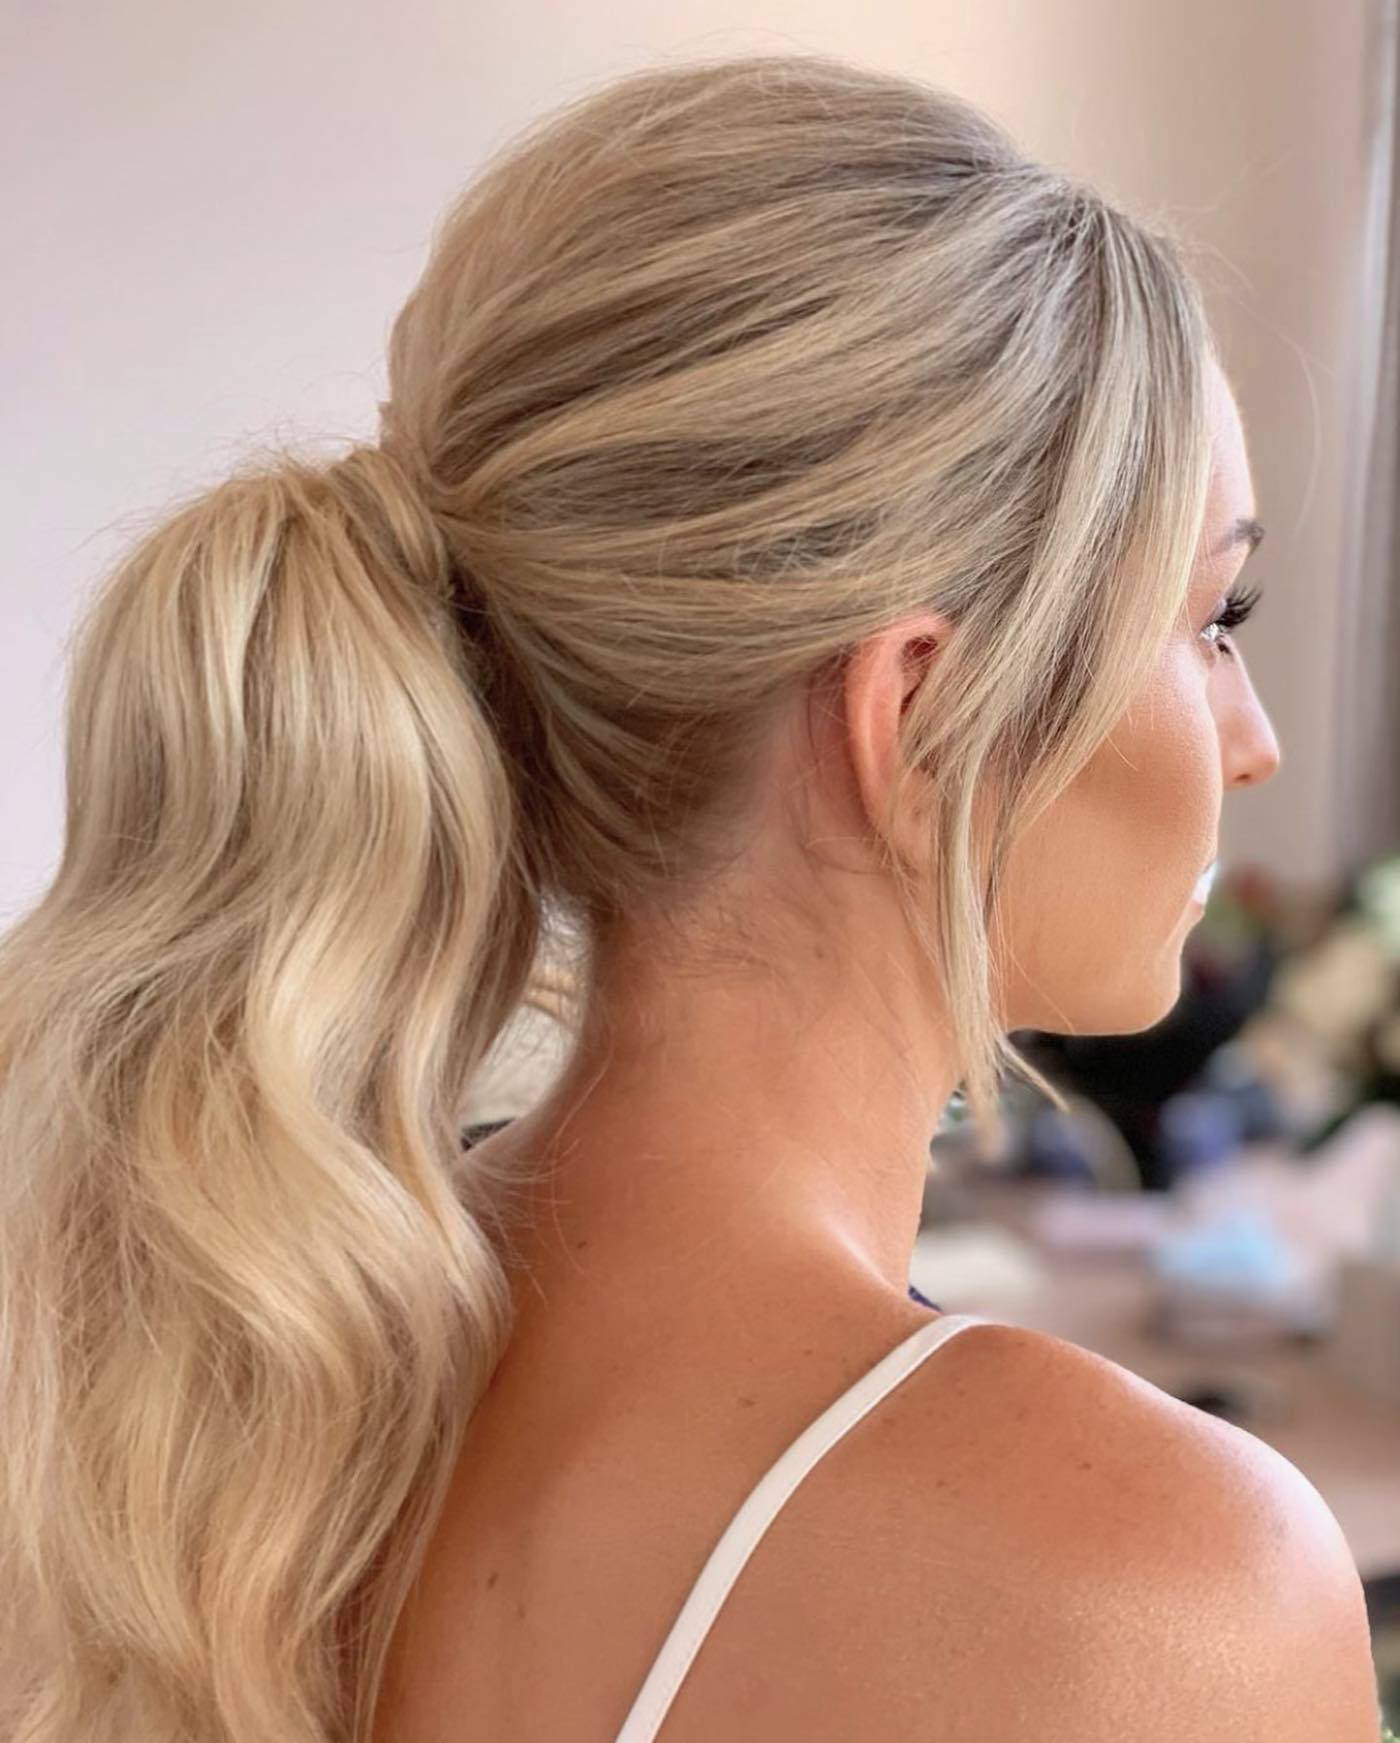 Blonde haired bride wearing hair extensions in a ponytail for her wedding.